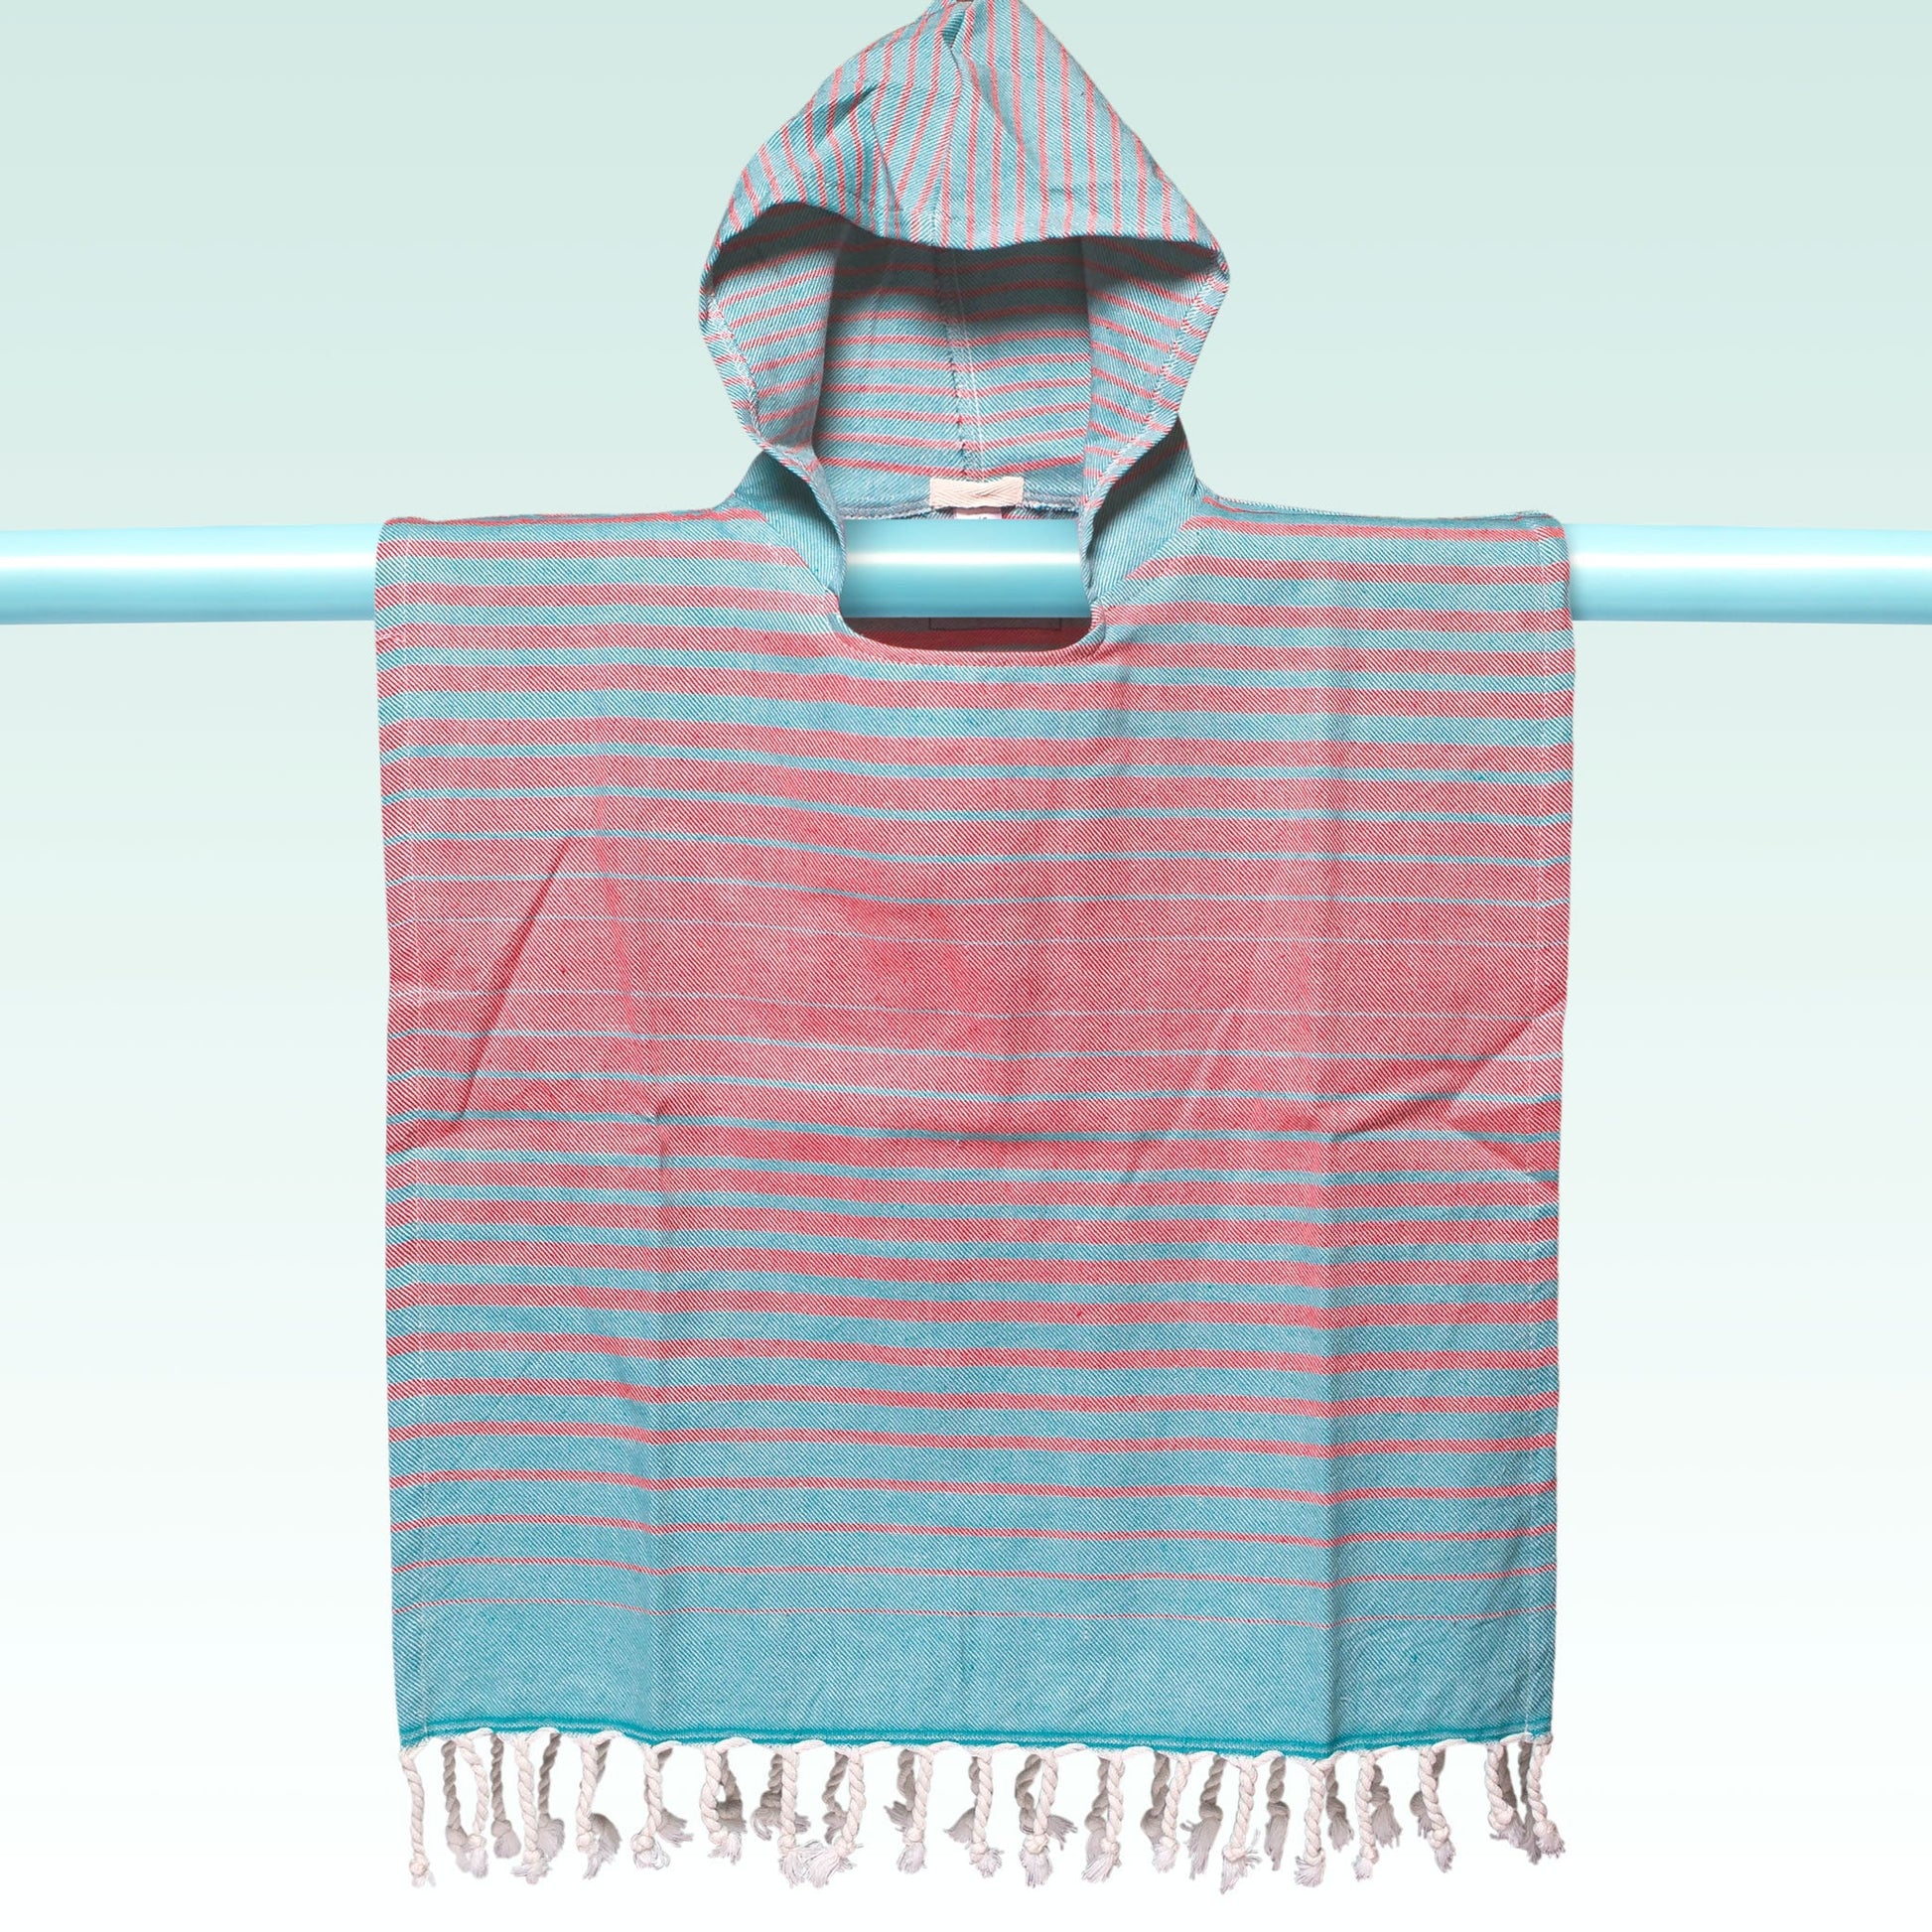 Children's Poncho and Parker Swell Orange and Turquoise